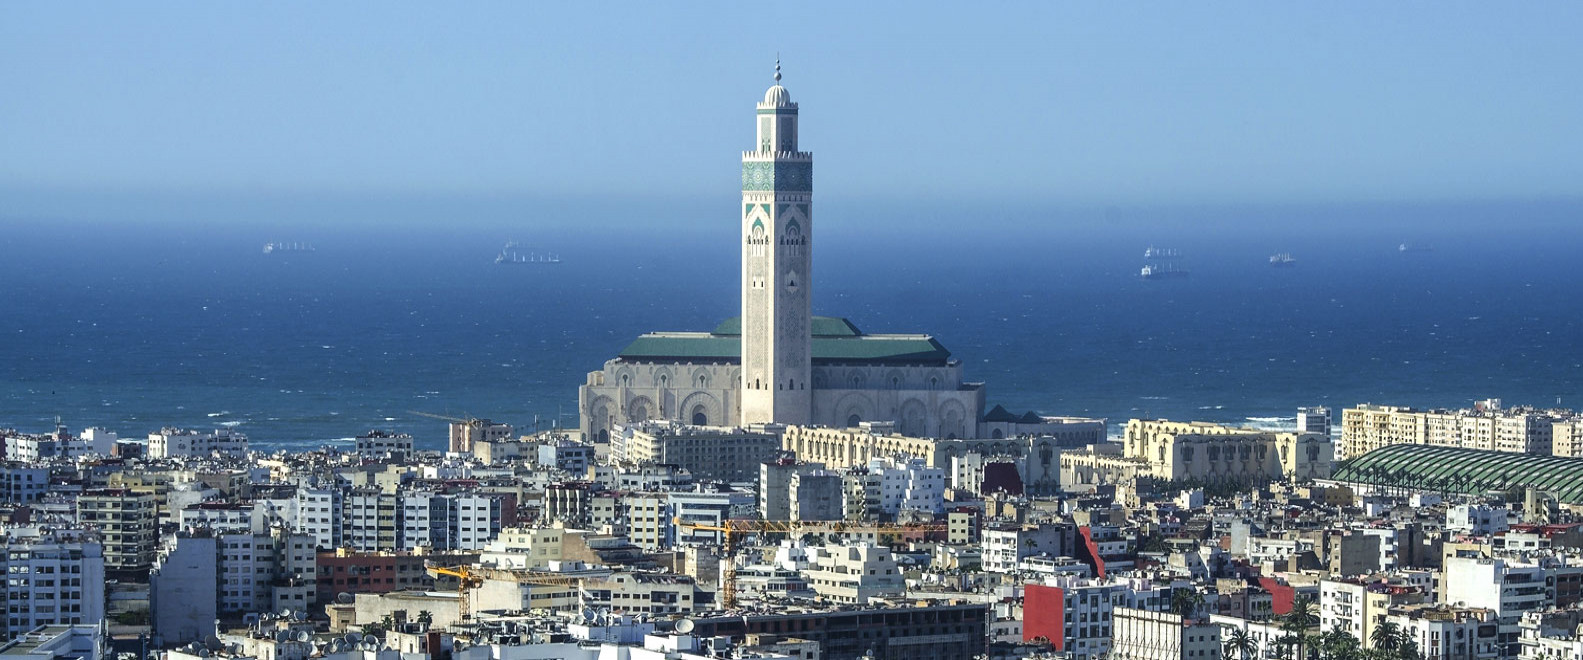 Casablanca, the energy of modernity | Moroccan National Tourist Office